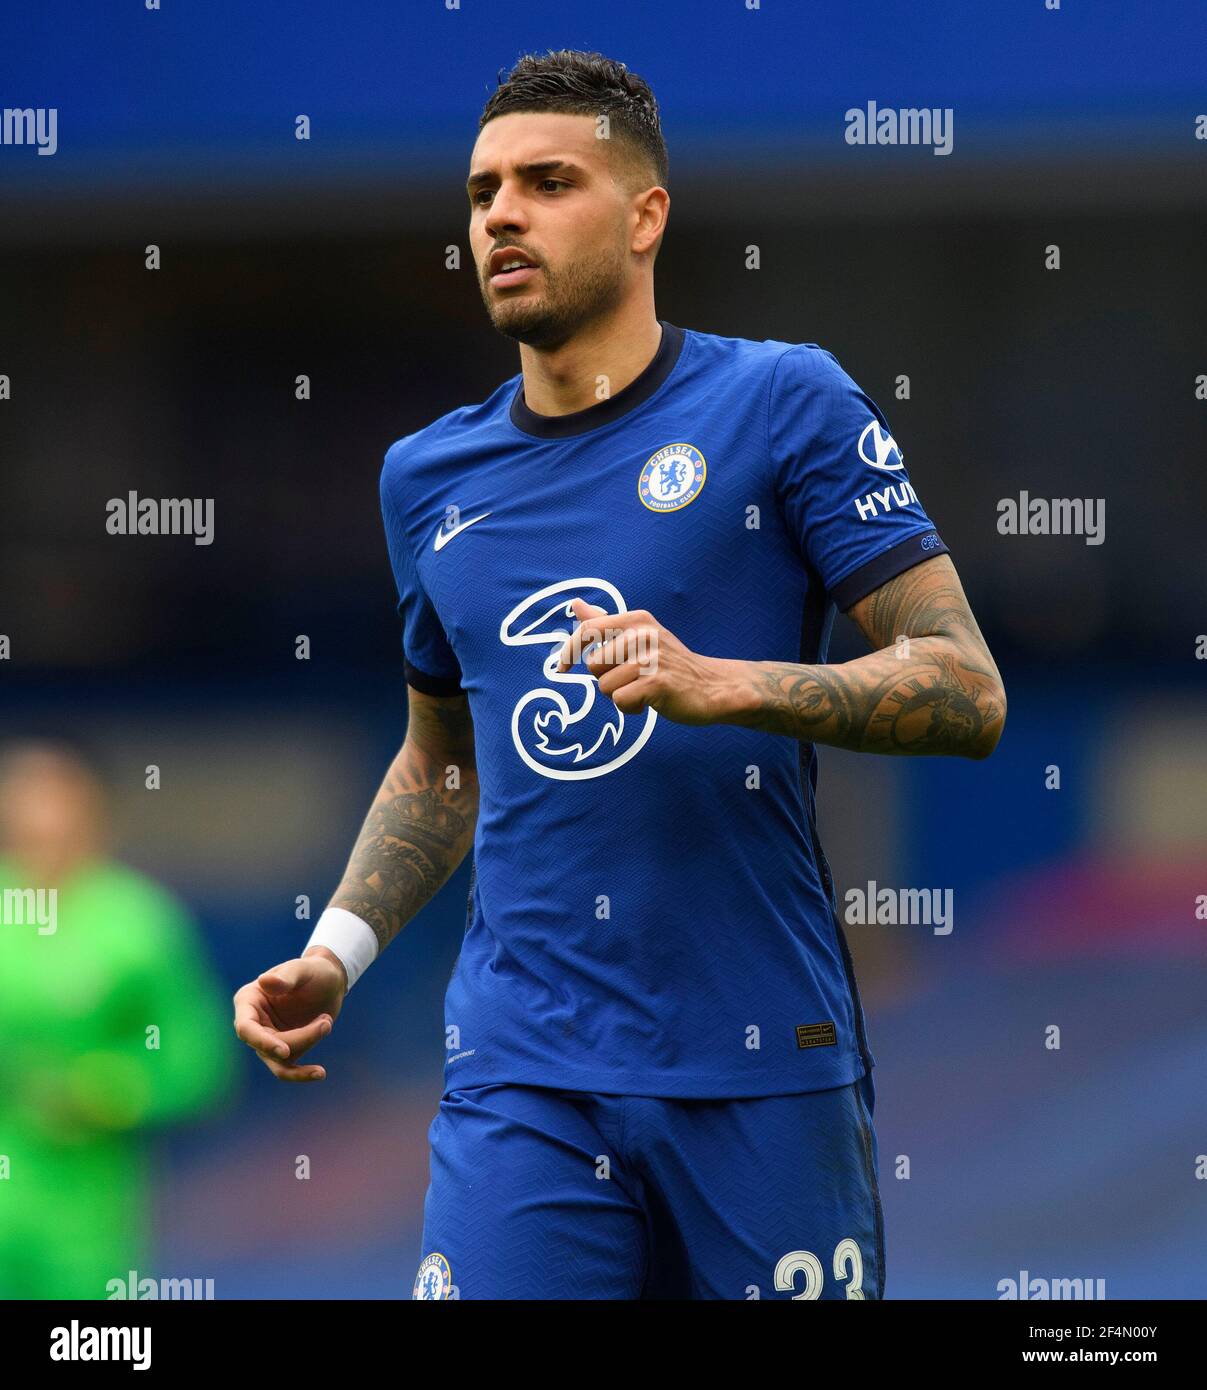 Stamford Bridge, London, 21 Mar 2021  Chelsea's Emerson Palmieri during their FA Cup match against Sheffield United Picture Credit : © Mark Pain / Alamy Live News Stock Photo